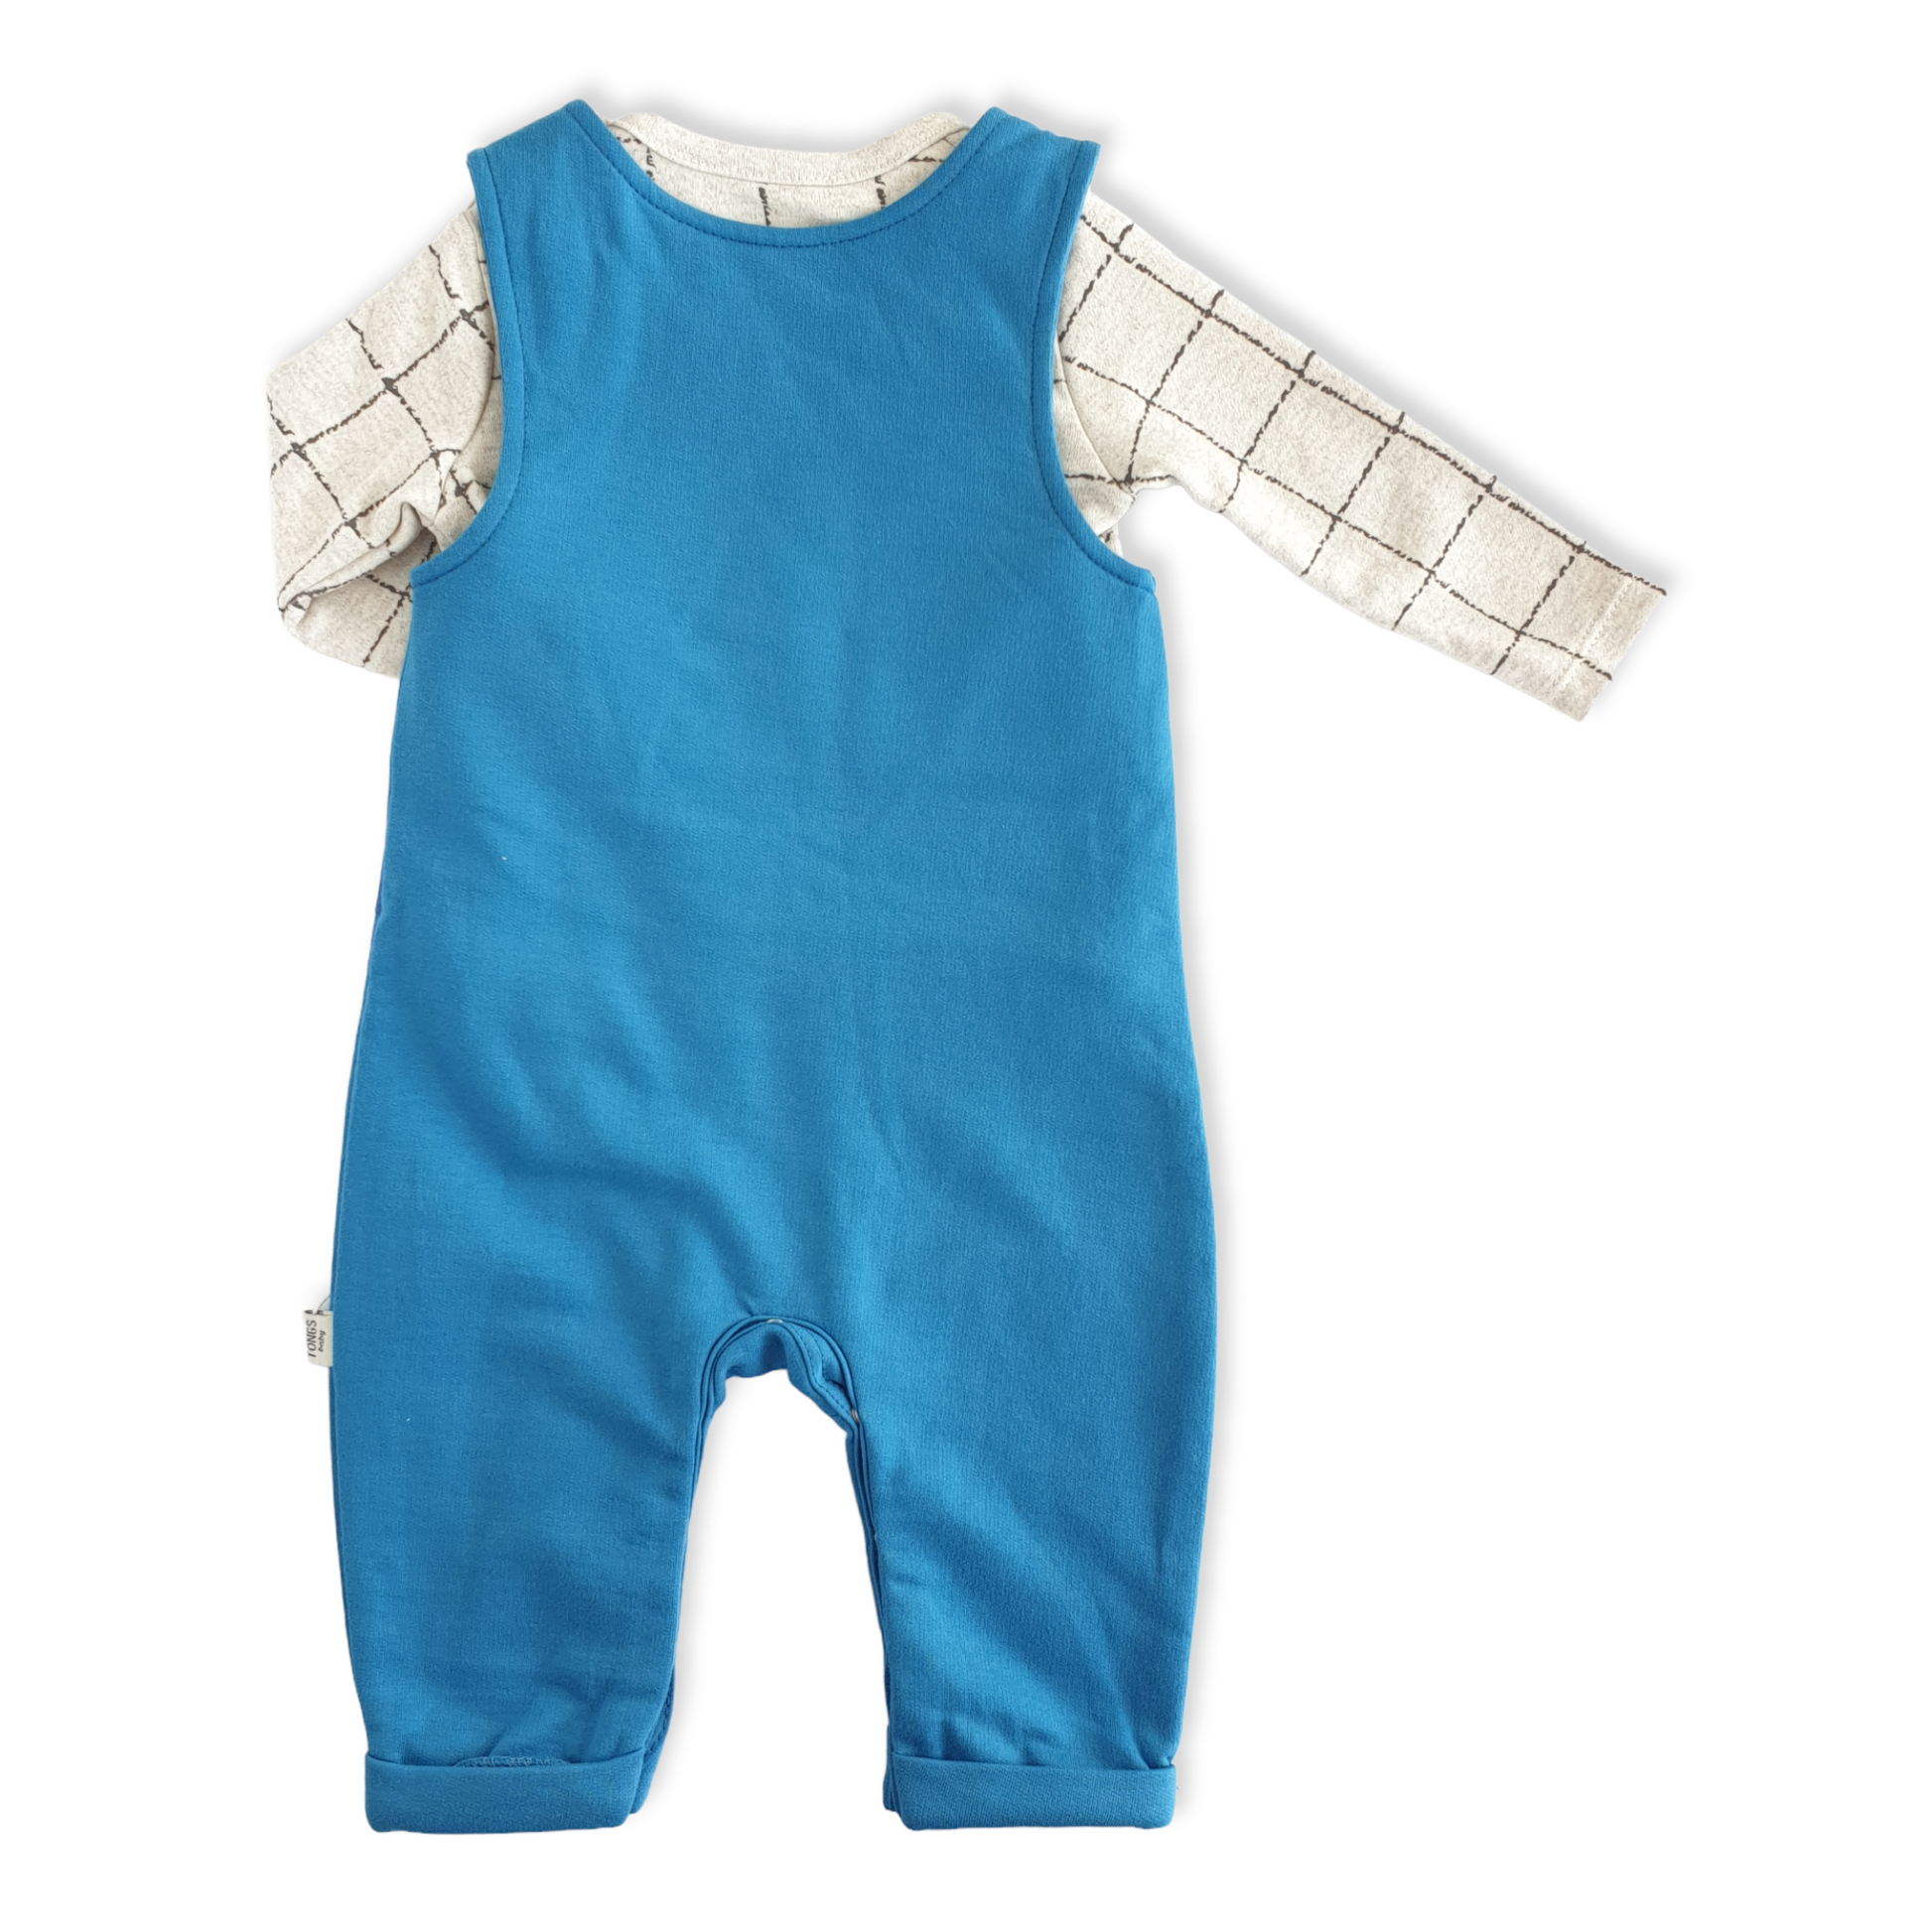 Blue Going for Walk Baby Boy Overall Set-Beige, Blue, Boy, Brown, catboy, Dog, Footless, Footprint, Long Sleeve, Orange, Overall, Salopette, Shirt, Top, Walk-Tongs-[Too Twee]-[Tootwee]-[baby]-[newborn]-[clothes]-[essentials]-[toys]-[Lebanon]